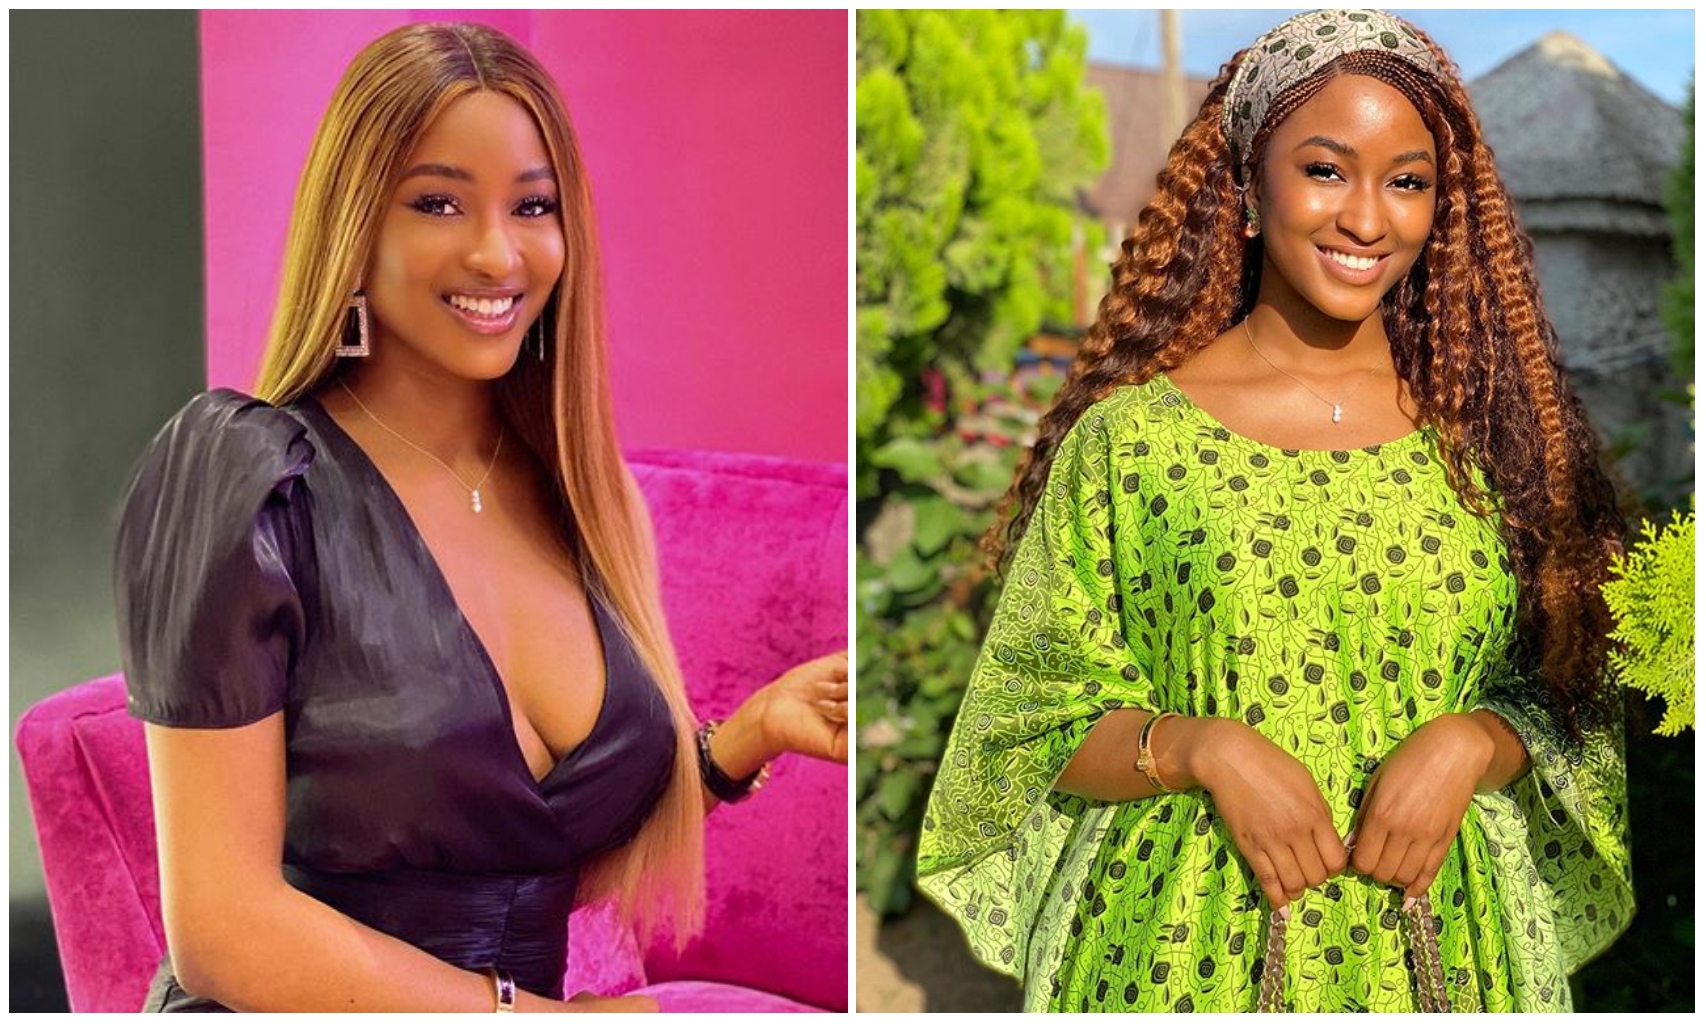 'Keep your whole life low-key' – BBNaija's Kim Oprah urges fans in new post (Photos)